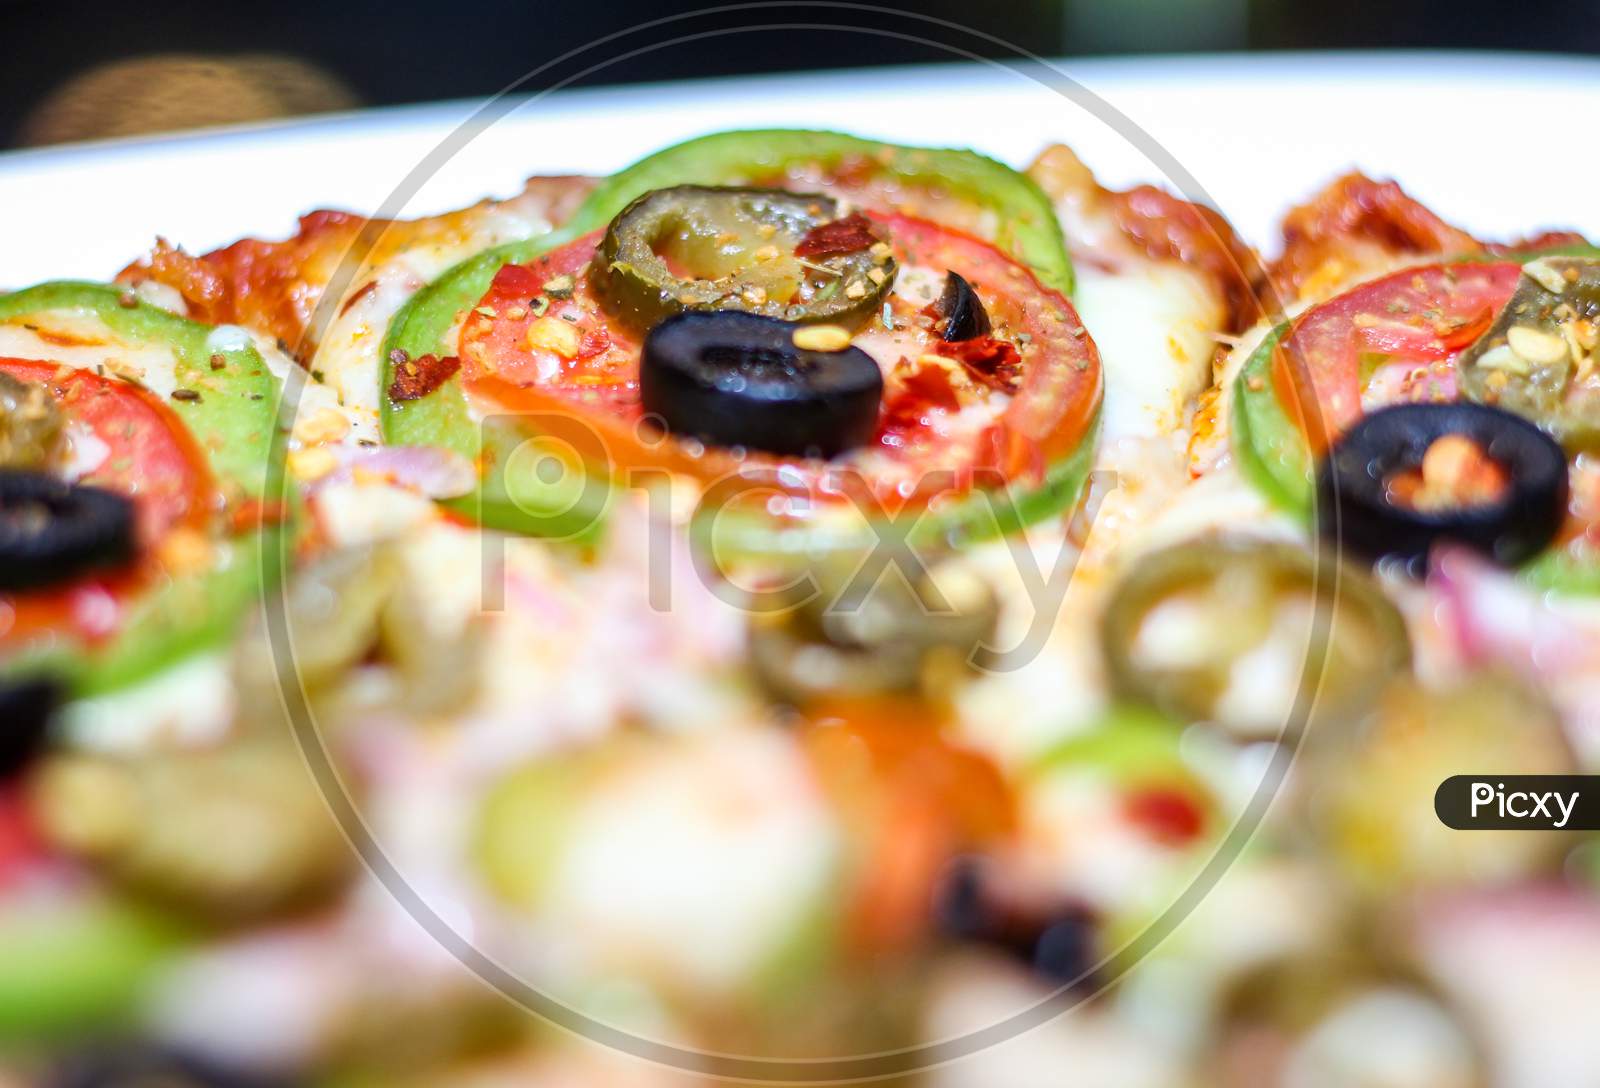 Fresh And Tasty Pizza With Vegetables, Tomato, Onion And Olives Isolated On White Plate. Close View.